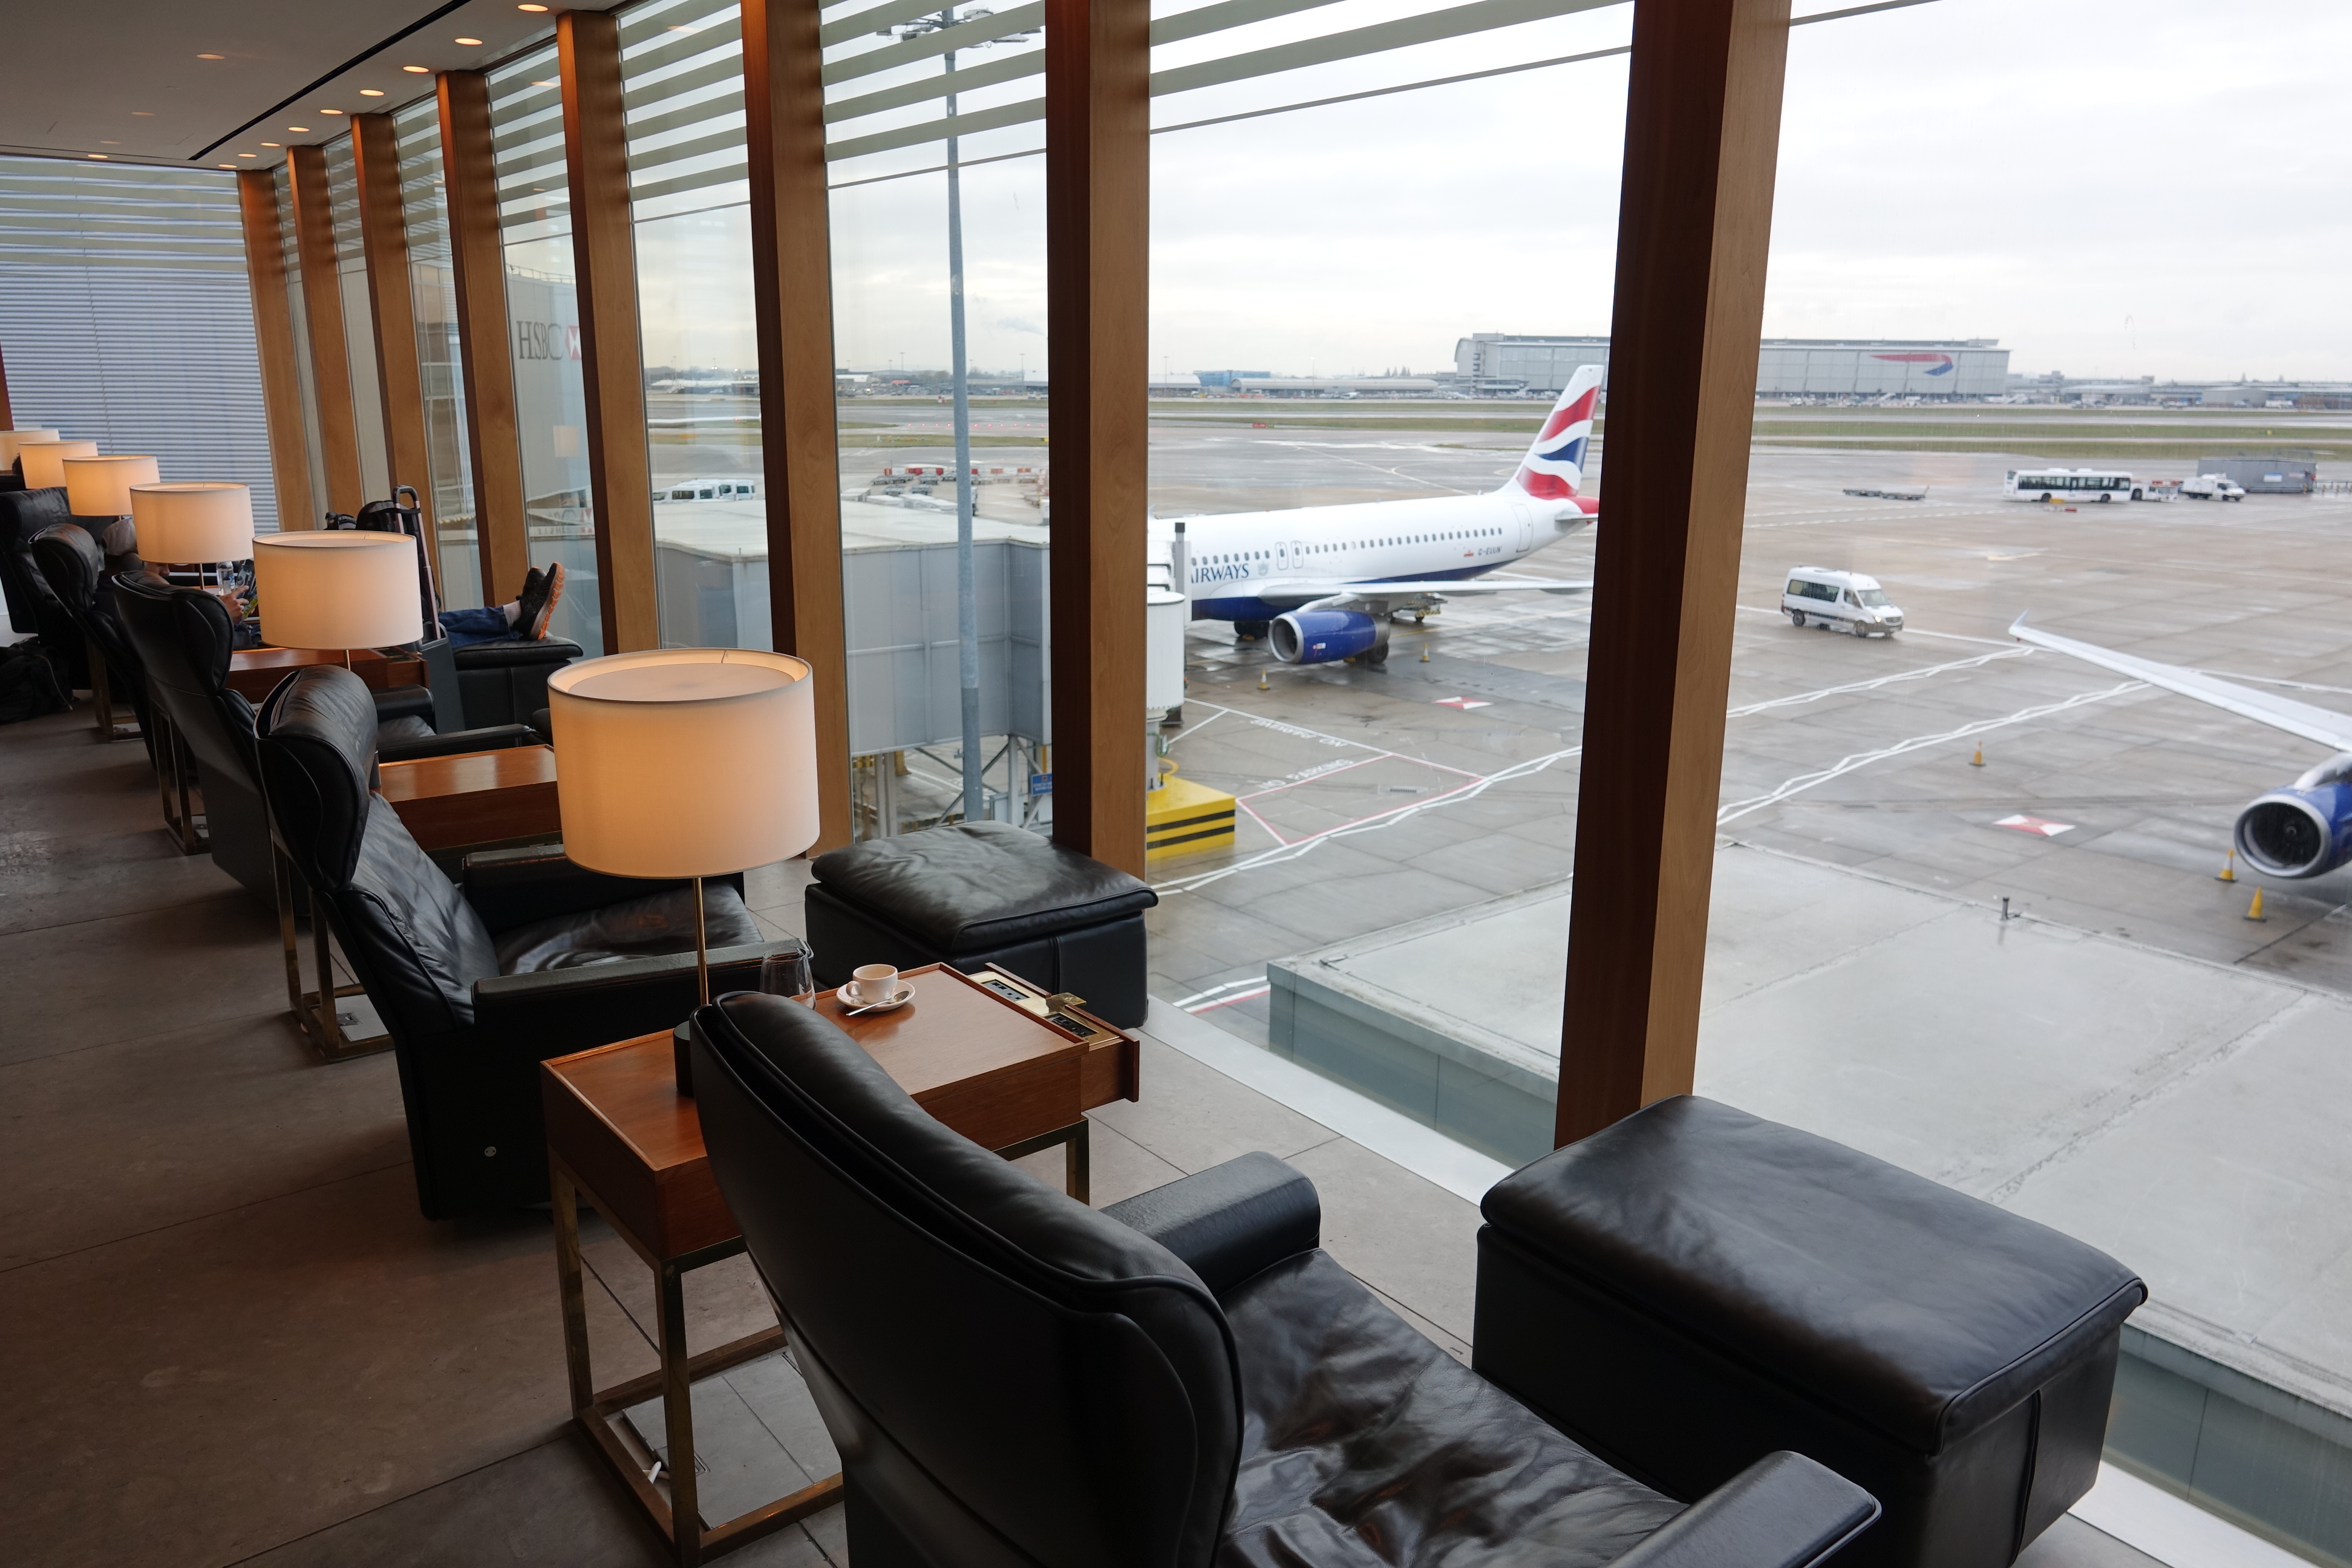 a room with a large window and a plane on the runway